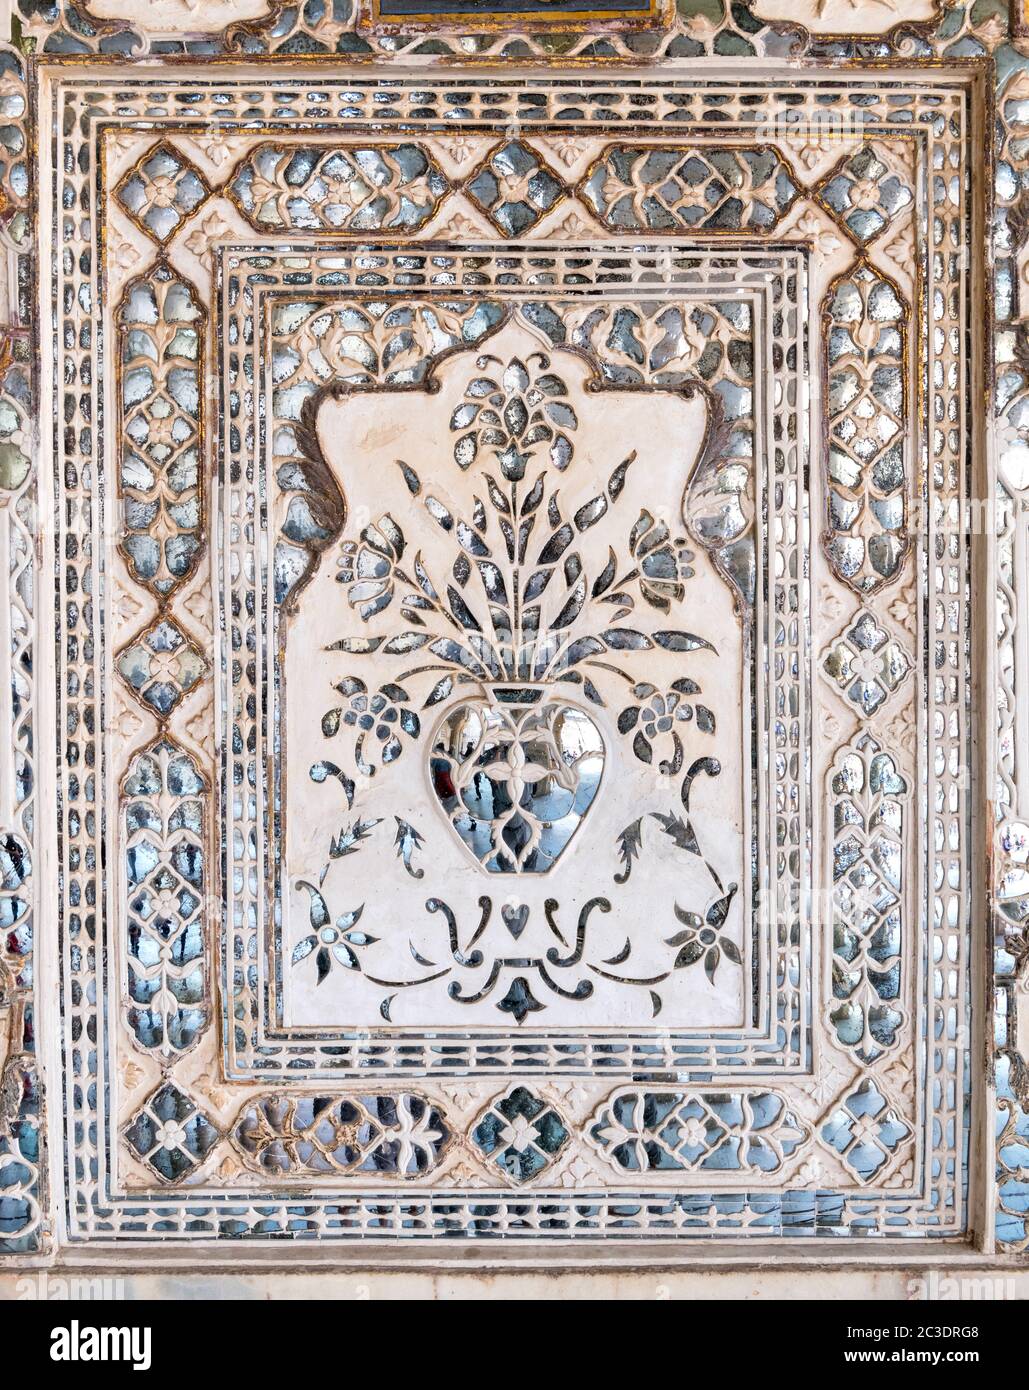 Wall decoration in the Amber Fort, Jaipur, Rajasthan, India Stock Photo